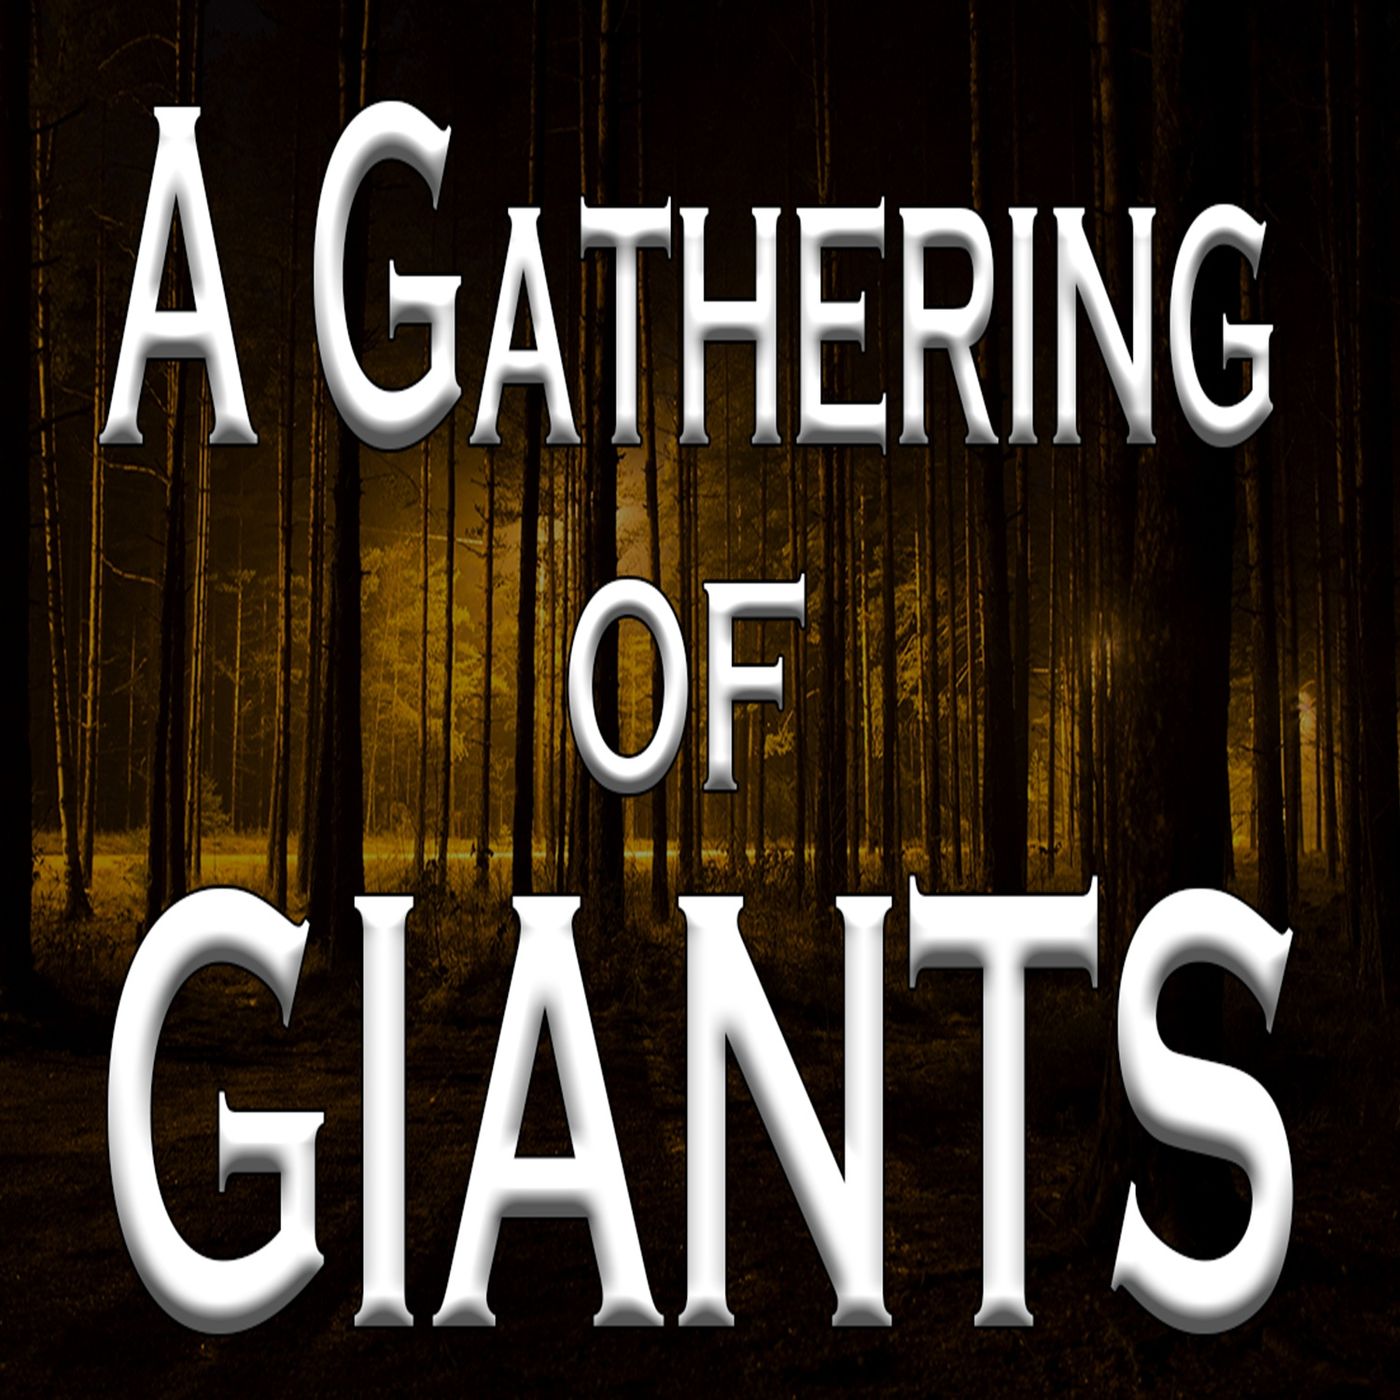 A Gathering of Giants